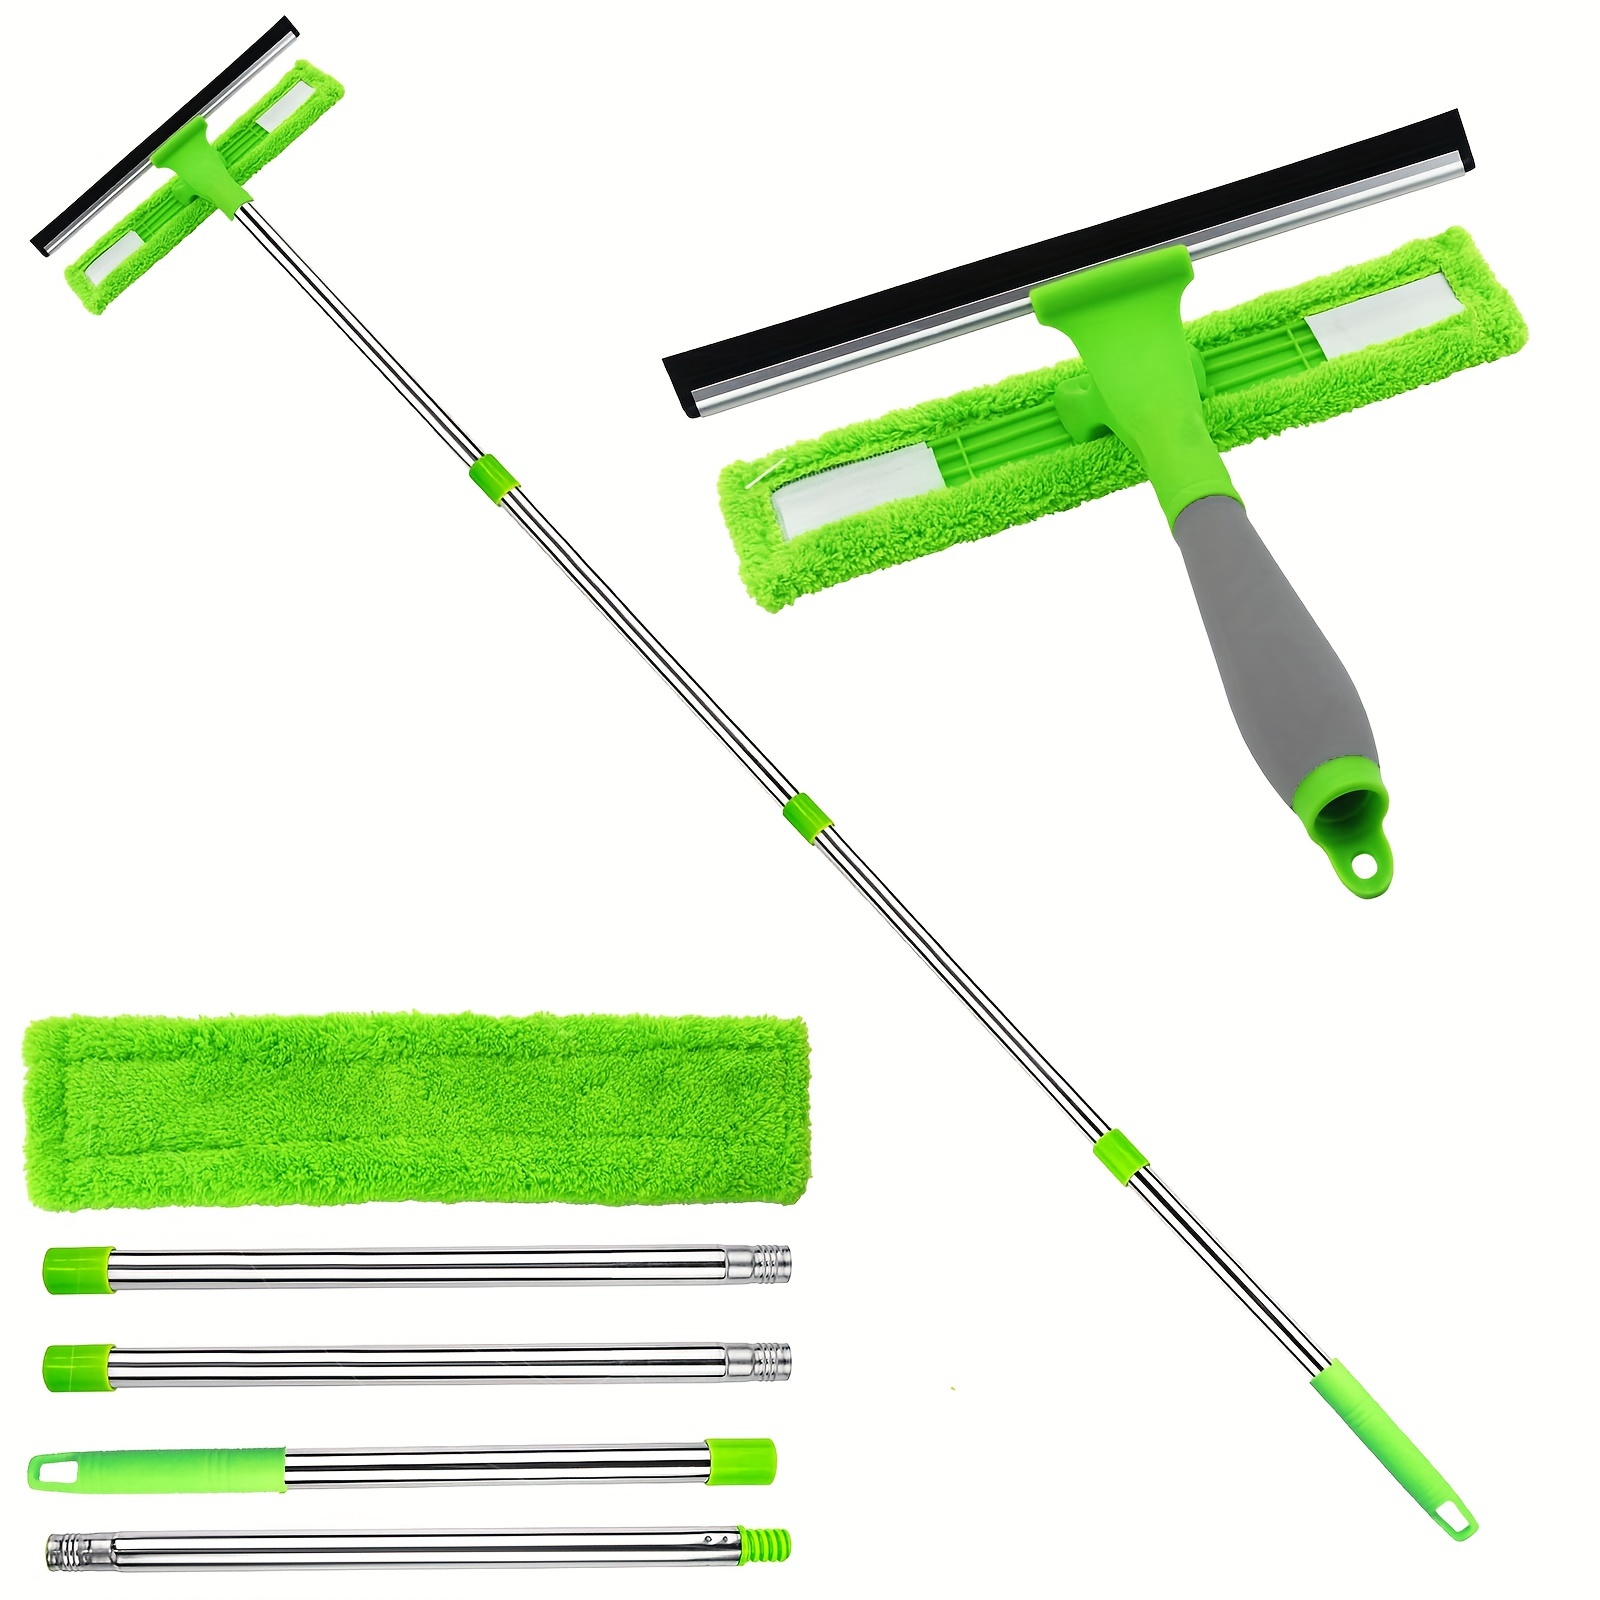  Window Squeegee with 67 Long Handle,Window Cleaning Squeegee  Kit Inlcude 2 Pcs Window Cleaning Cloth，2 in 1 Window Cleaner - Car Squeegee  and a Long Window Squeegee for Window,Car and Glass 